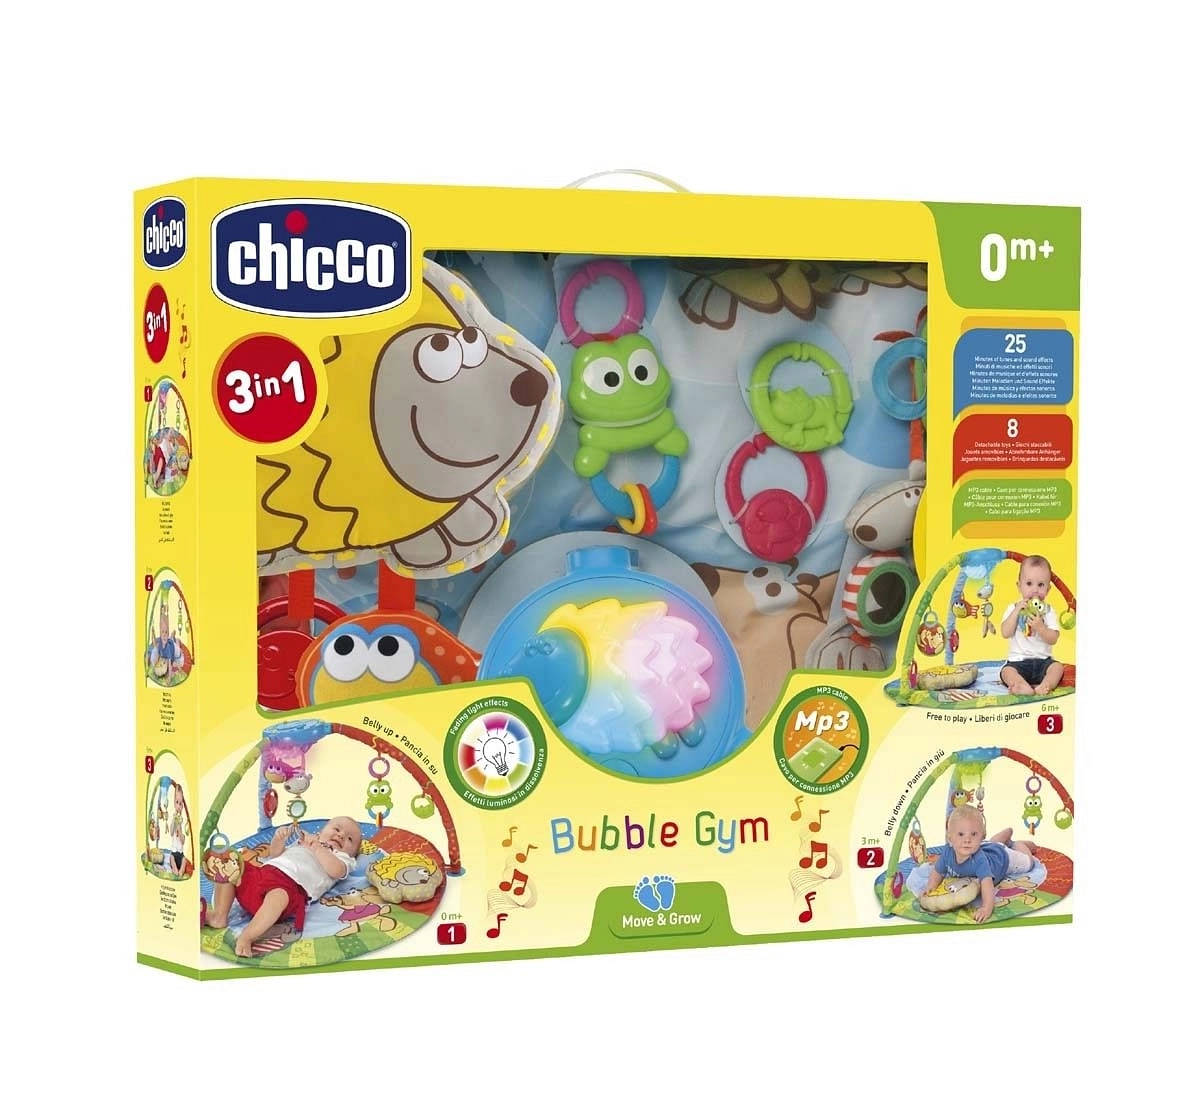 Chicco Bubble Gym Playmat - Multicolor Baby Gear for Kids age 0M+ 